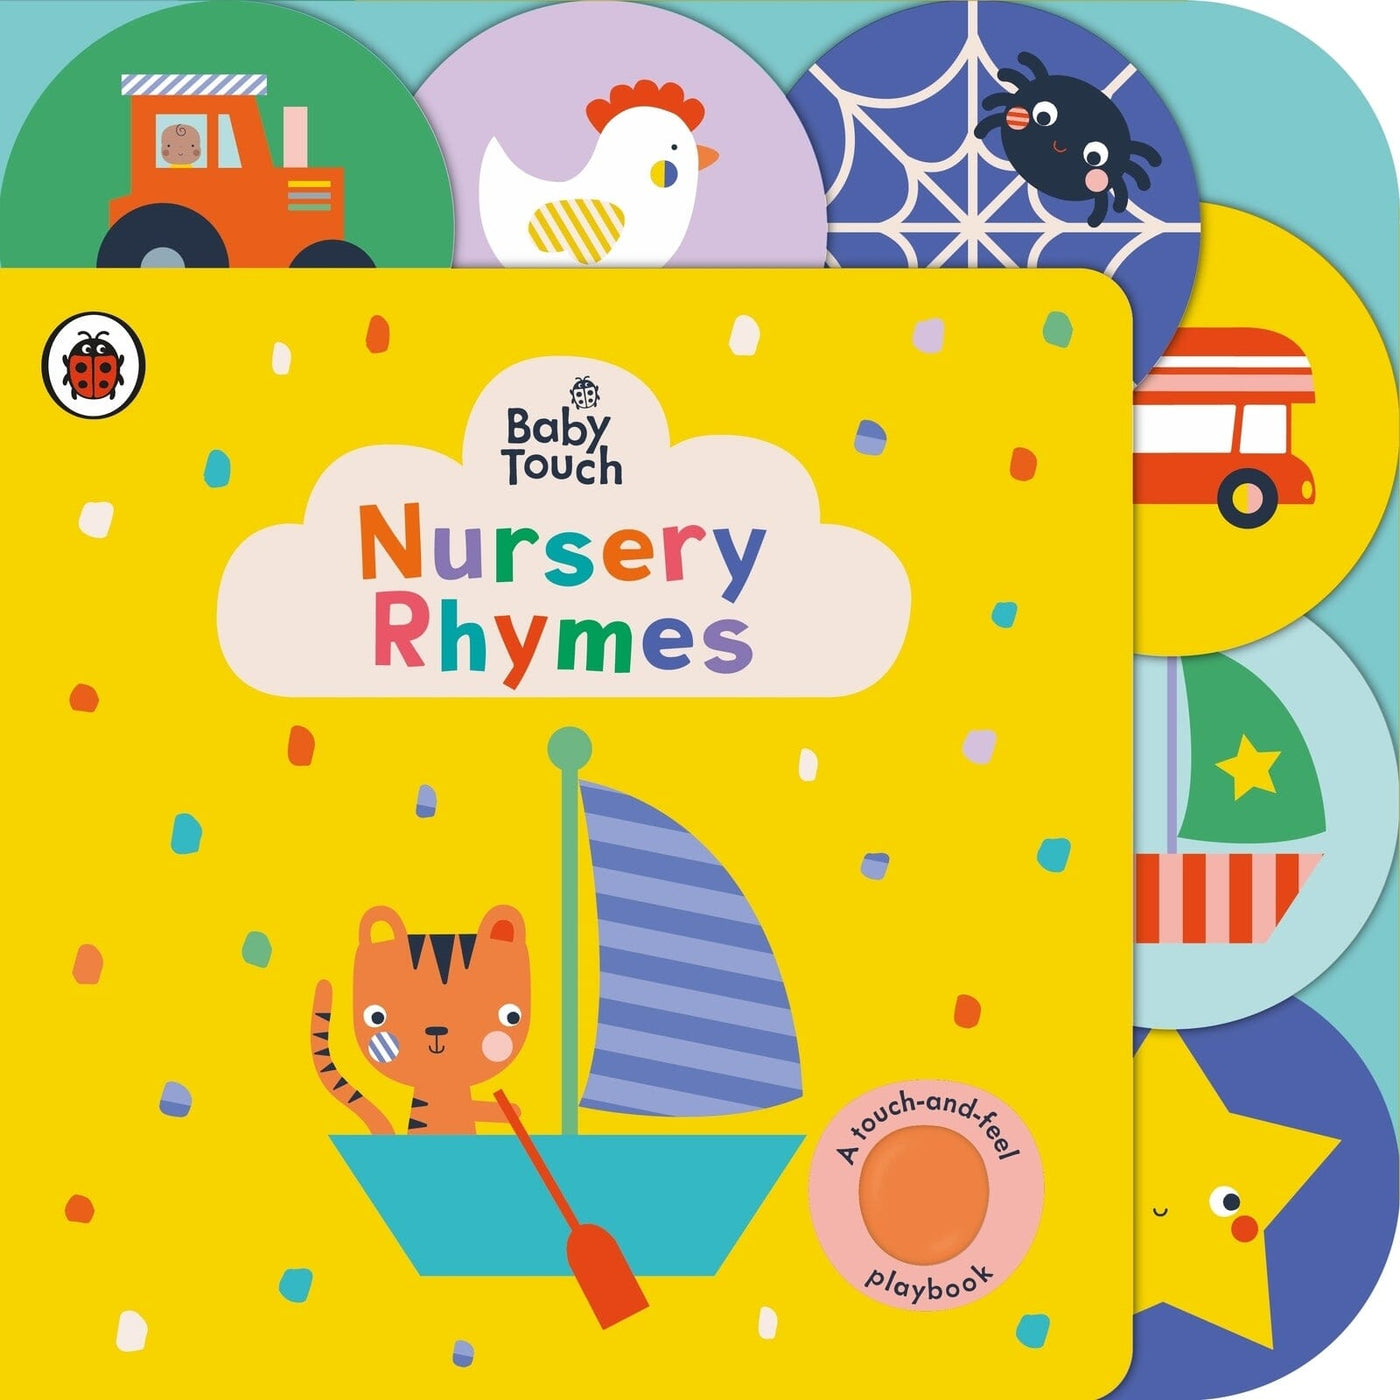 Baby Touch Nursery Rhymes Books Harper Collins 